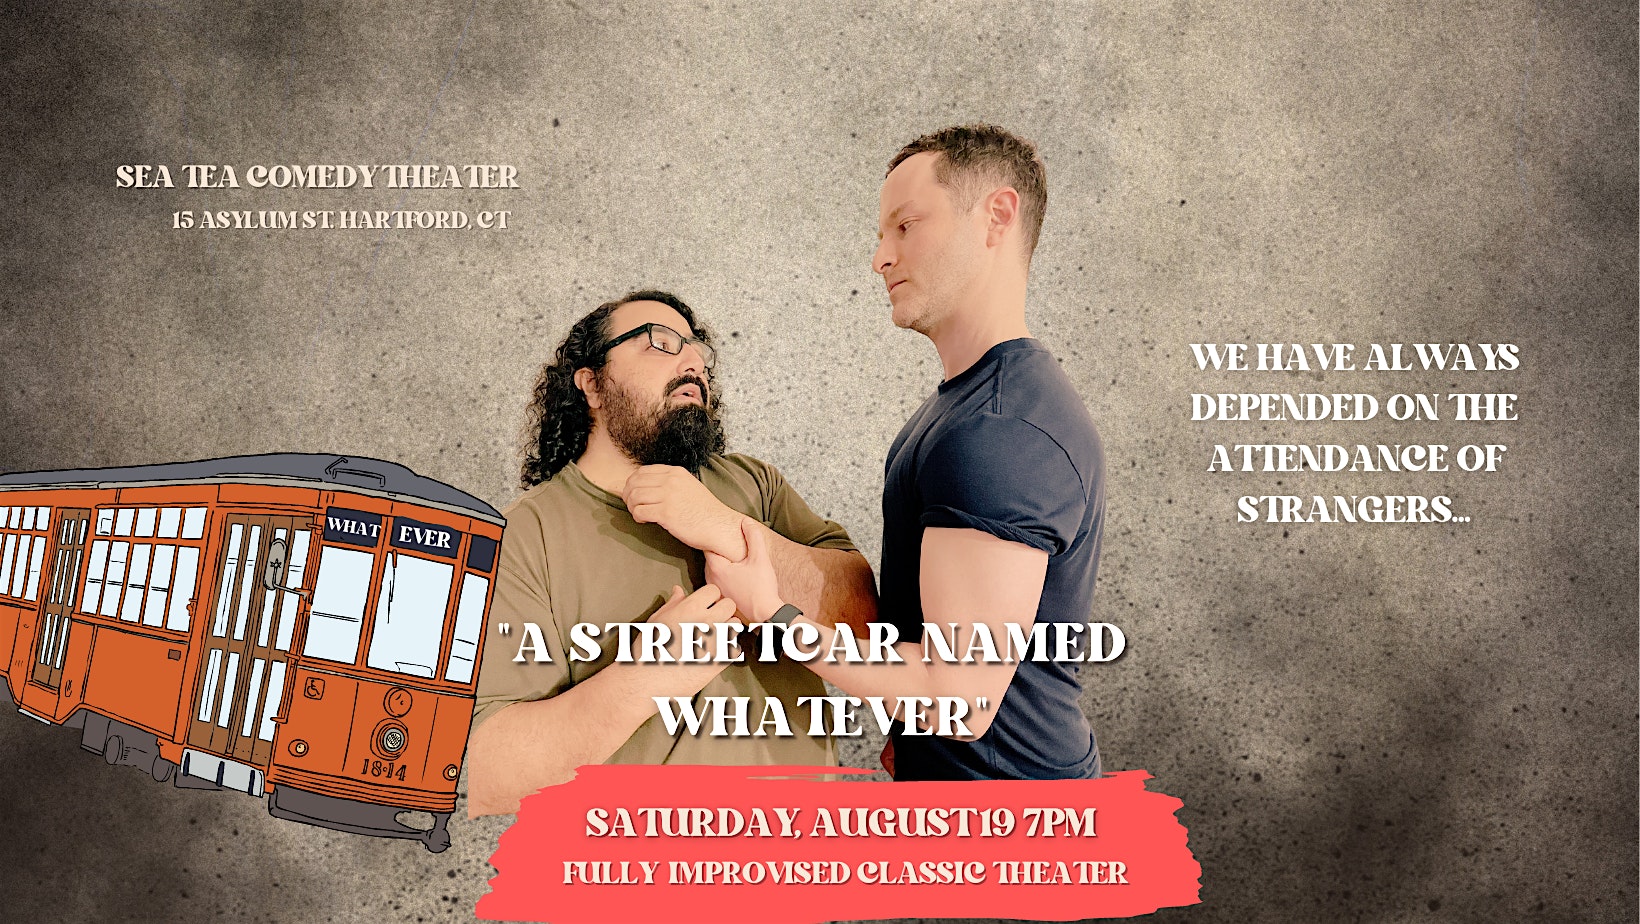 A Streetcar Named Whatever - Fully Improvised Classic Theater